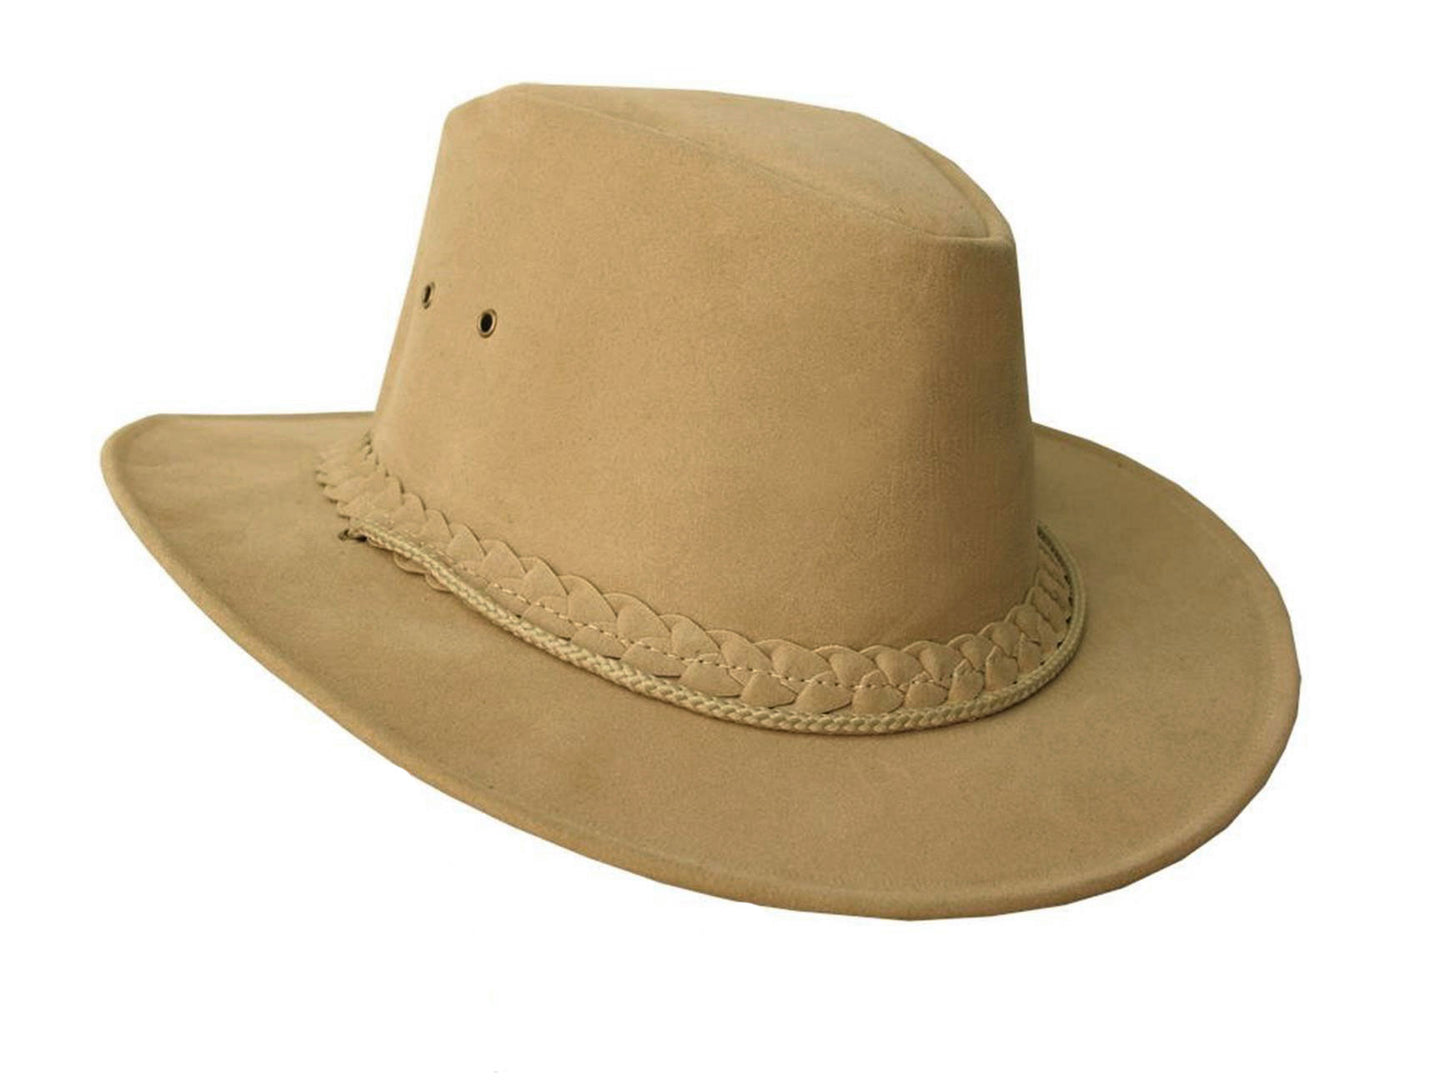 Outdoor summer hat in suede look super light and airy including chin strap waterproof with UV protection for men, women and children | sand